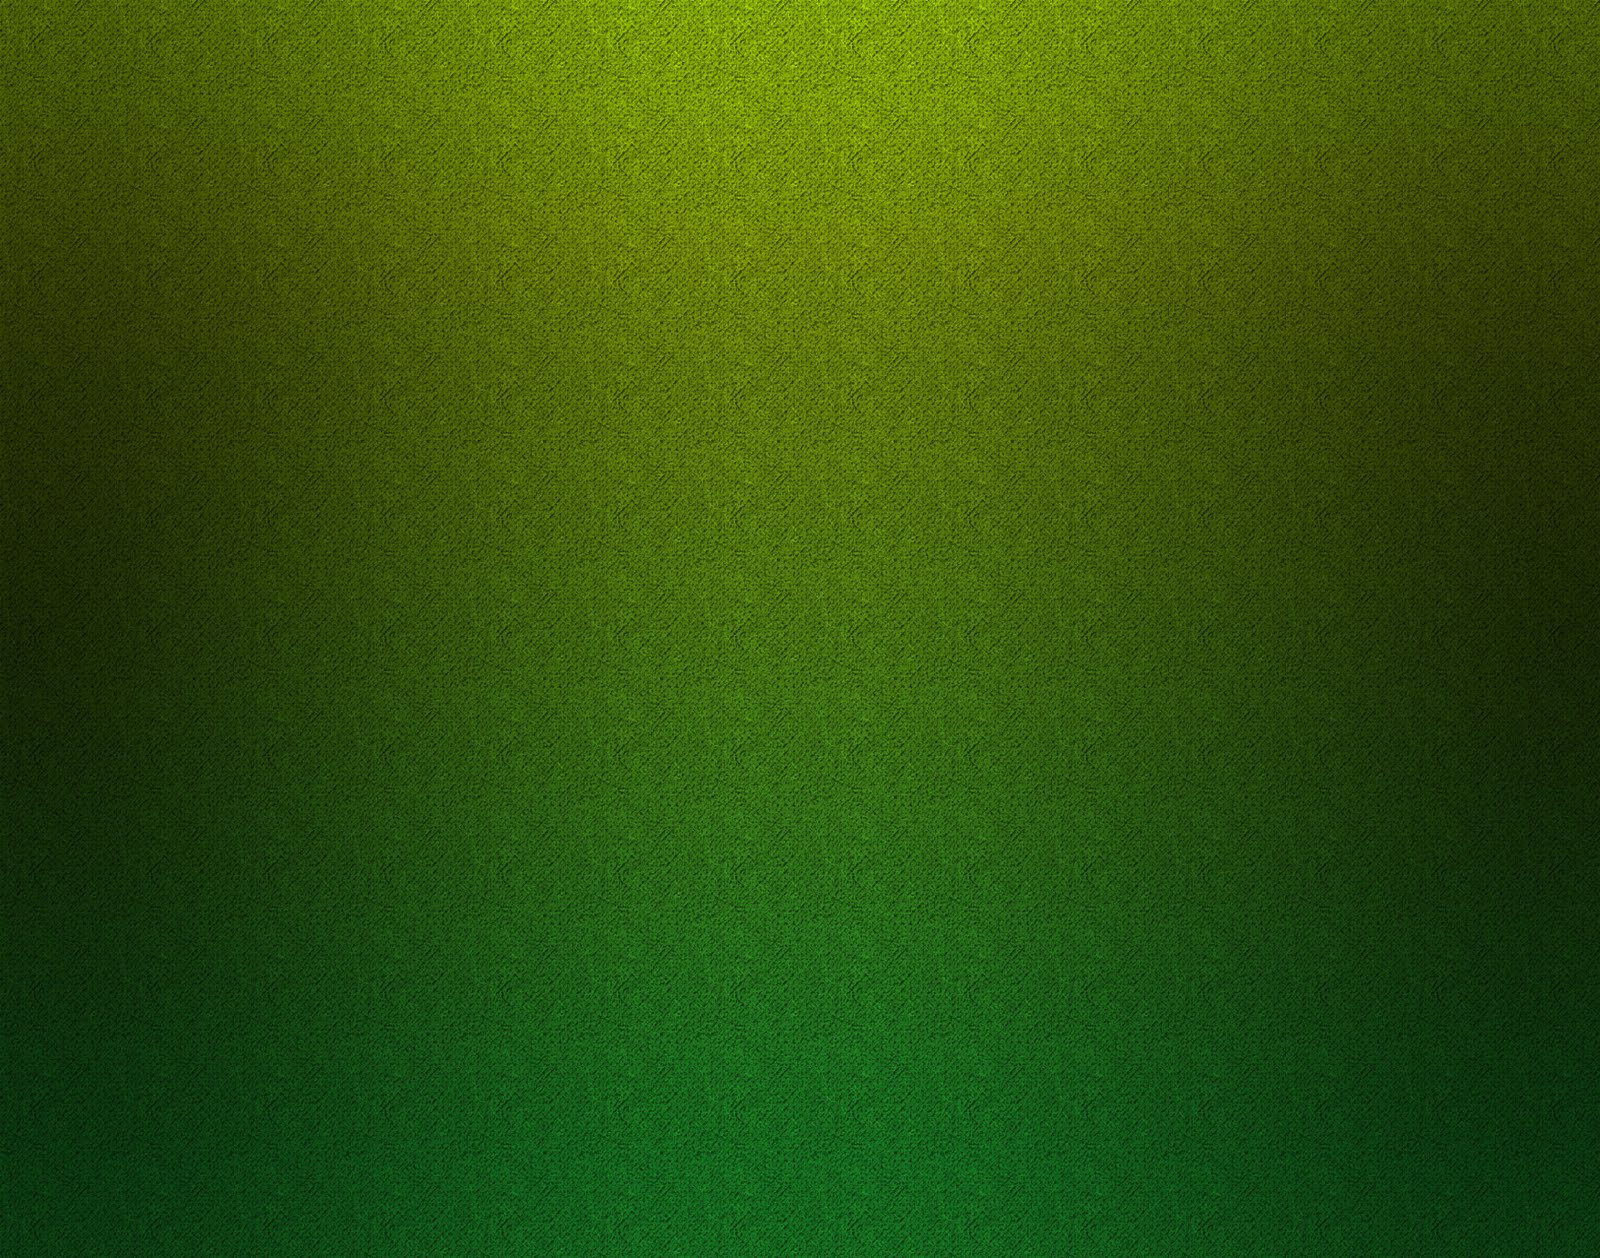 Green textures Download PowerPoint Backgrounds   PPT Backgrounds